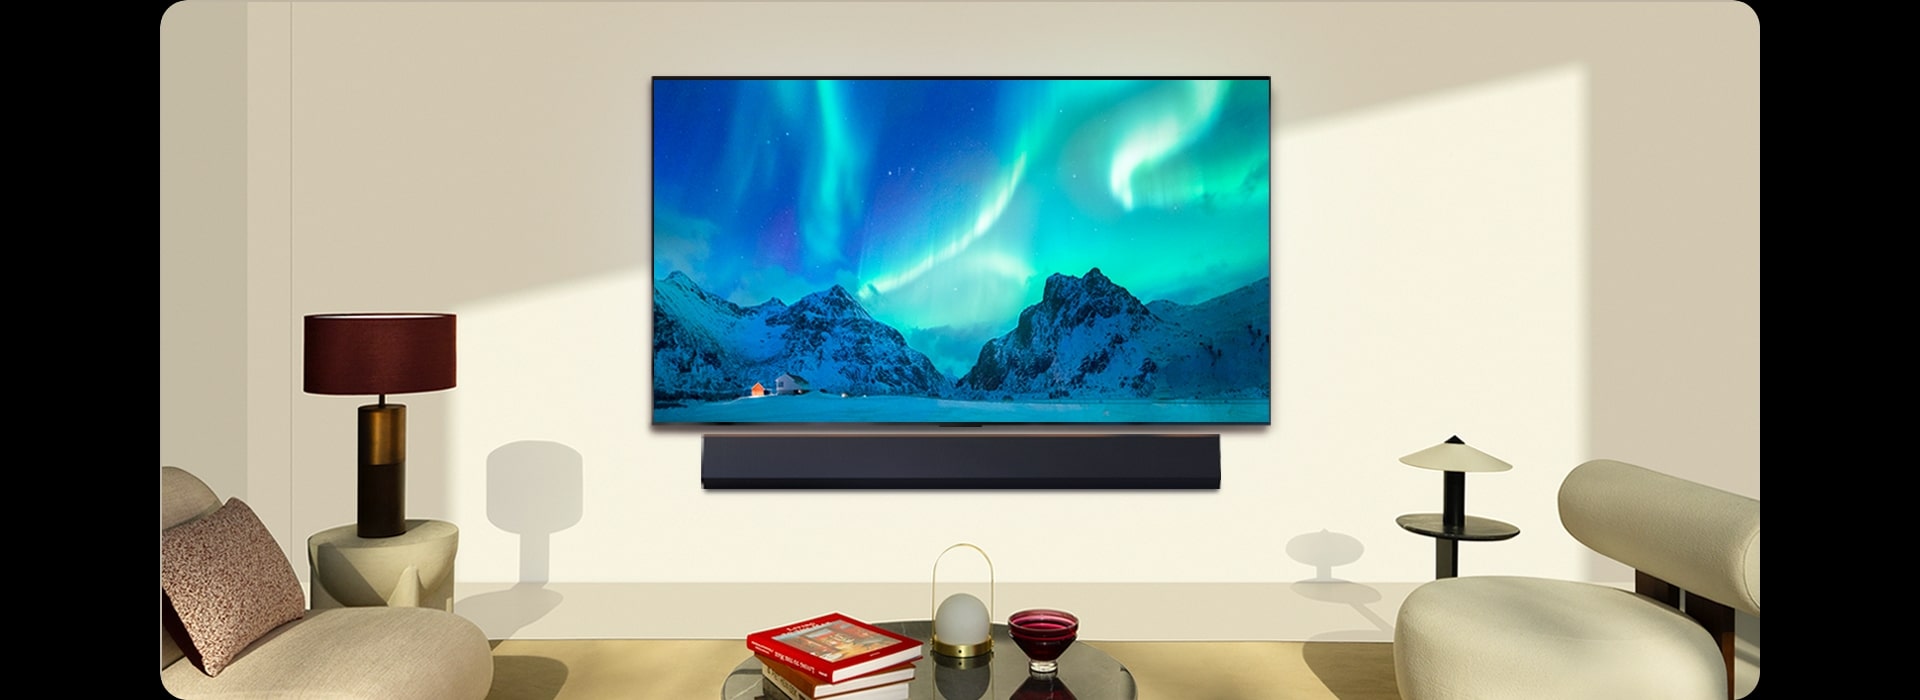 An image of an LG OLED TV and LG Soundbar in a modern living space in daytime. The image of the aurora borealis is displayed with the ideal brightness levels.	